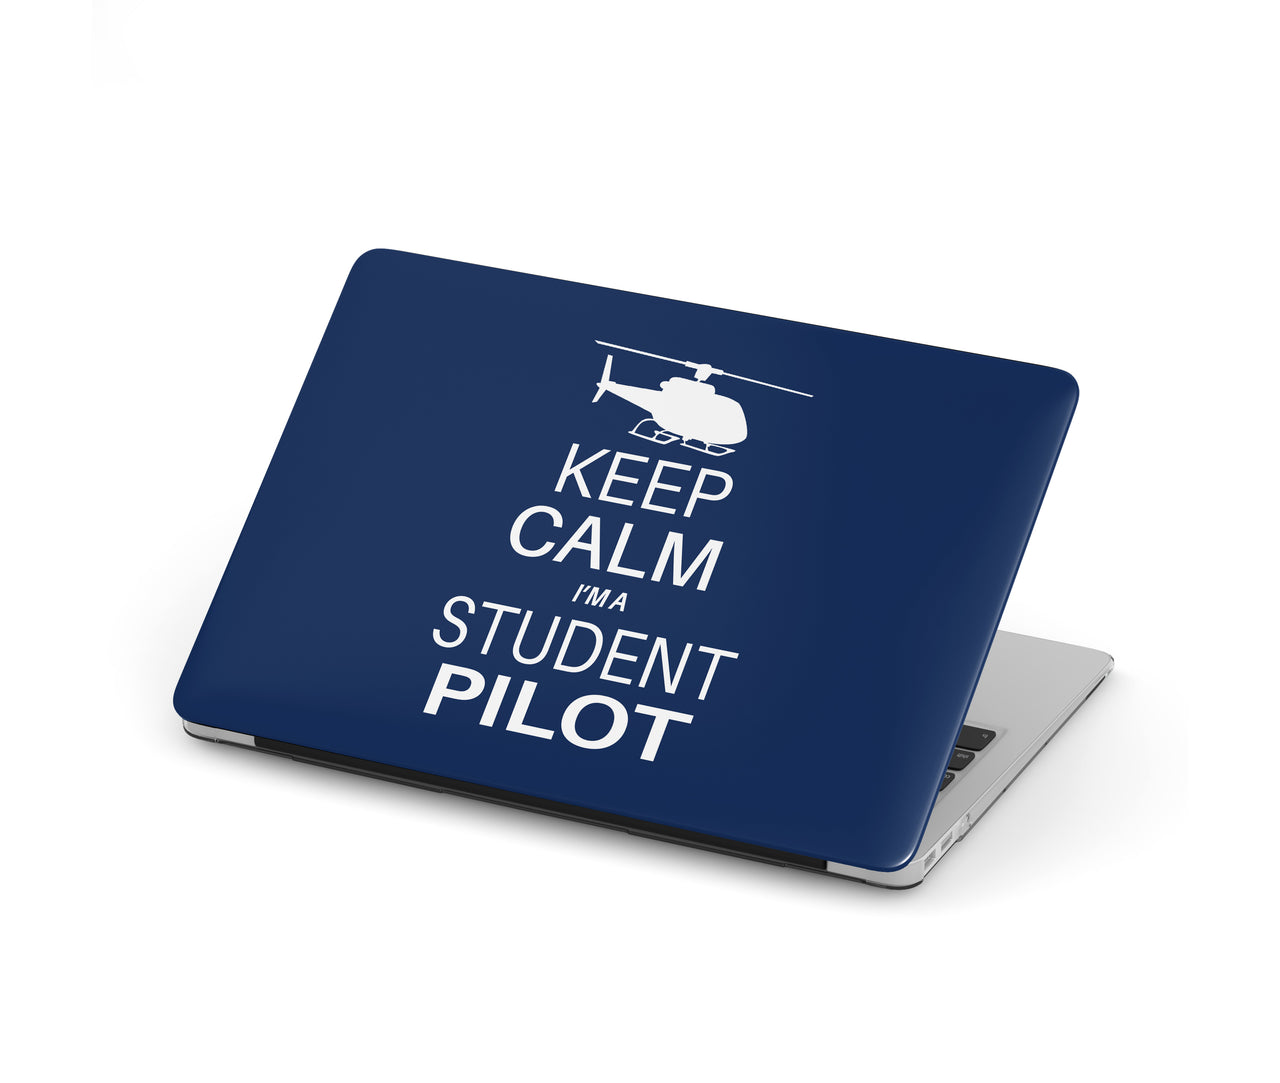 Student Pilot (Helicopter) Designed Macbook Cases